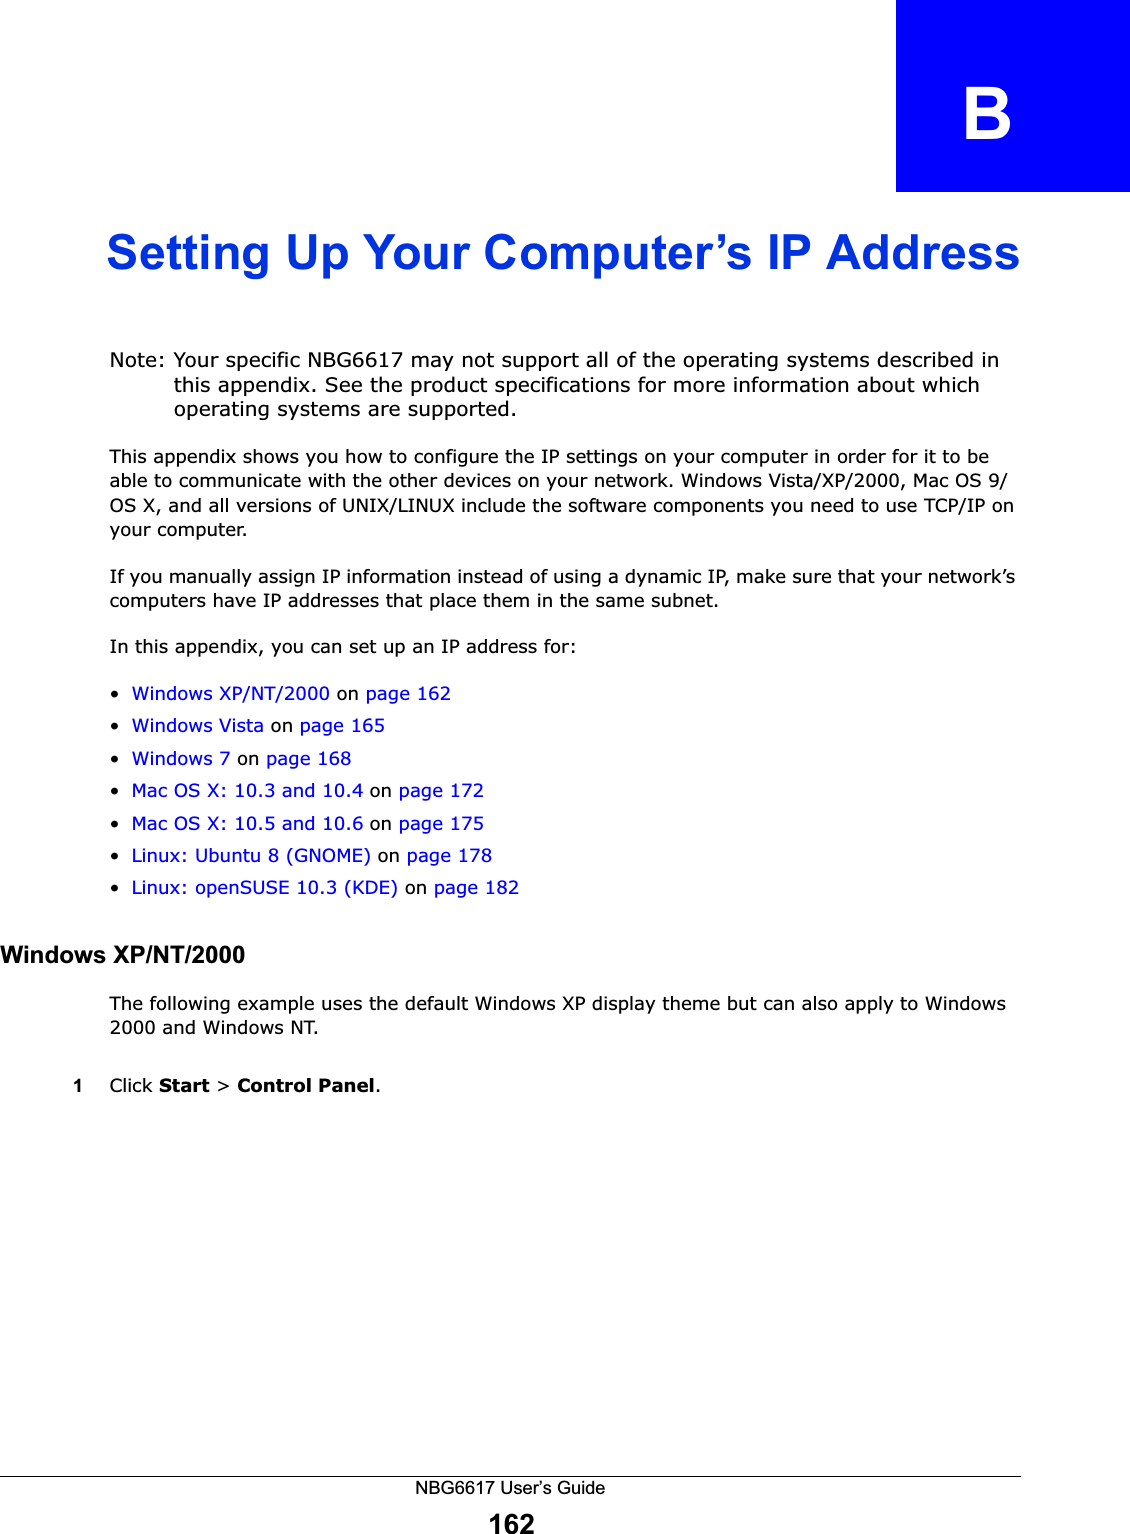 NBG6617 User’s Guide162APPENDIX   BSetting Up Your Computer’s IP AddressNote: Your specific NBG6617 may not support all of the operating systems described in this appendix. See the product specifications for more information about which operating systems are supported.This appendix shows you how to configure the IP settings on your computer in order for it to be able to communicate with the other devices on your network. Windows Vista/XP/2000, Mac OS 9/OS X, and all versions of UNIX/LINUX include the software components you need to use TCP/IP on your computer. If you manually assign IP information instead of using a dynamic IP, make sure that your network’s computers have IP addresses that place them in the same subnet.In this appendix, you can set up an IP address for:•Windows XP/NT/2000 on page 162•Windows Vista on page 165•Windows 7 on page 168•Mac OS X: 10.3 and 10.4 on page 172•Mac OS X: 10.5 and 10.6 on page 175•Linux: Ubuntu 8 (GNOME) on page 178•Linux: openSUSE 10.3 (KDE) on page 182Windows XP/NT/2000The following example uses the default Windows XP display theme but can also apply to Windows 2000 and Windows NT.1Click Start &gt; Control Panel.